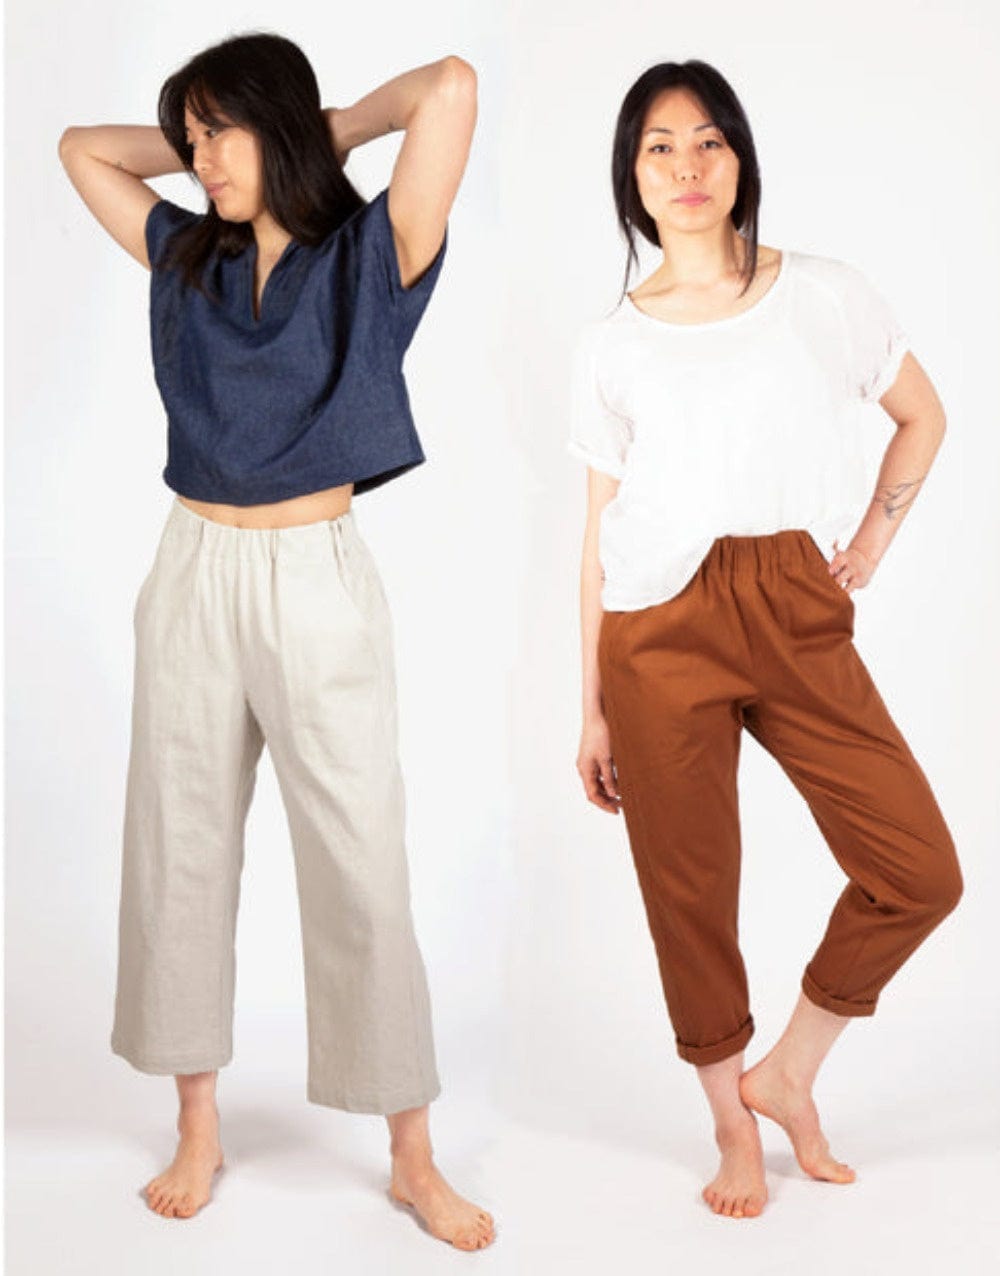 Sara Pleated Pants Tutorial and Free Pattern – the thread